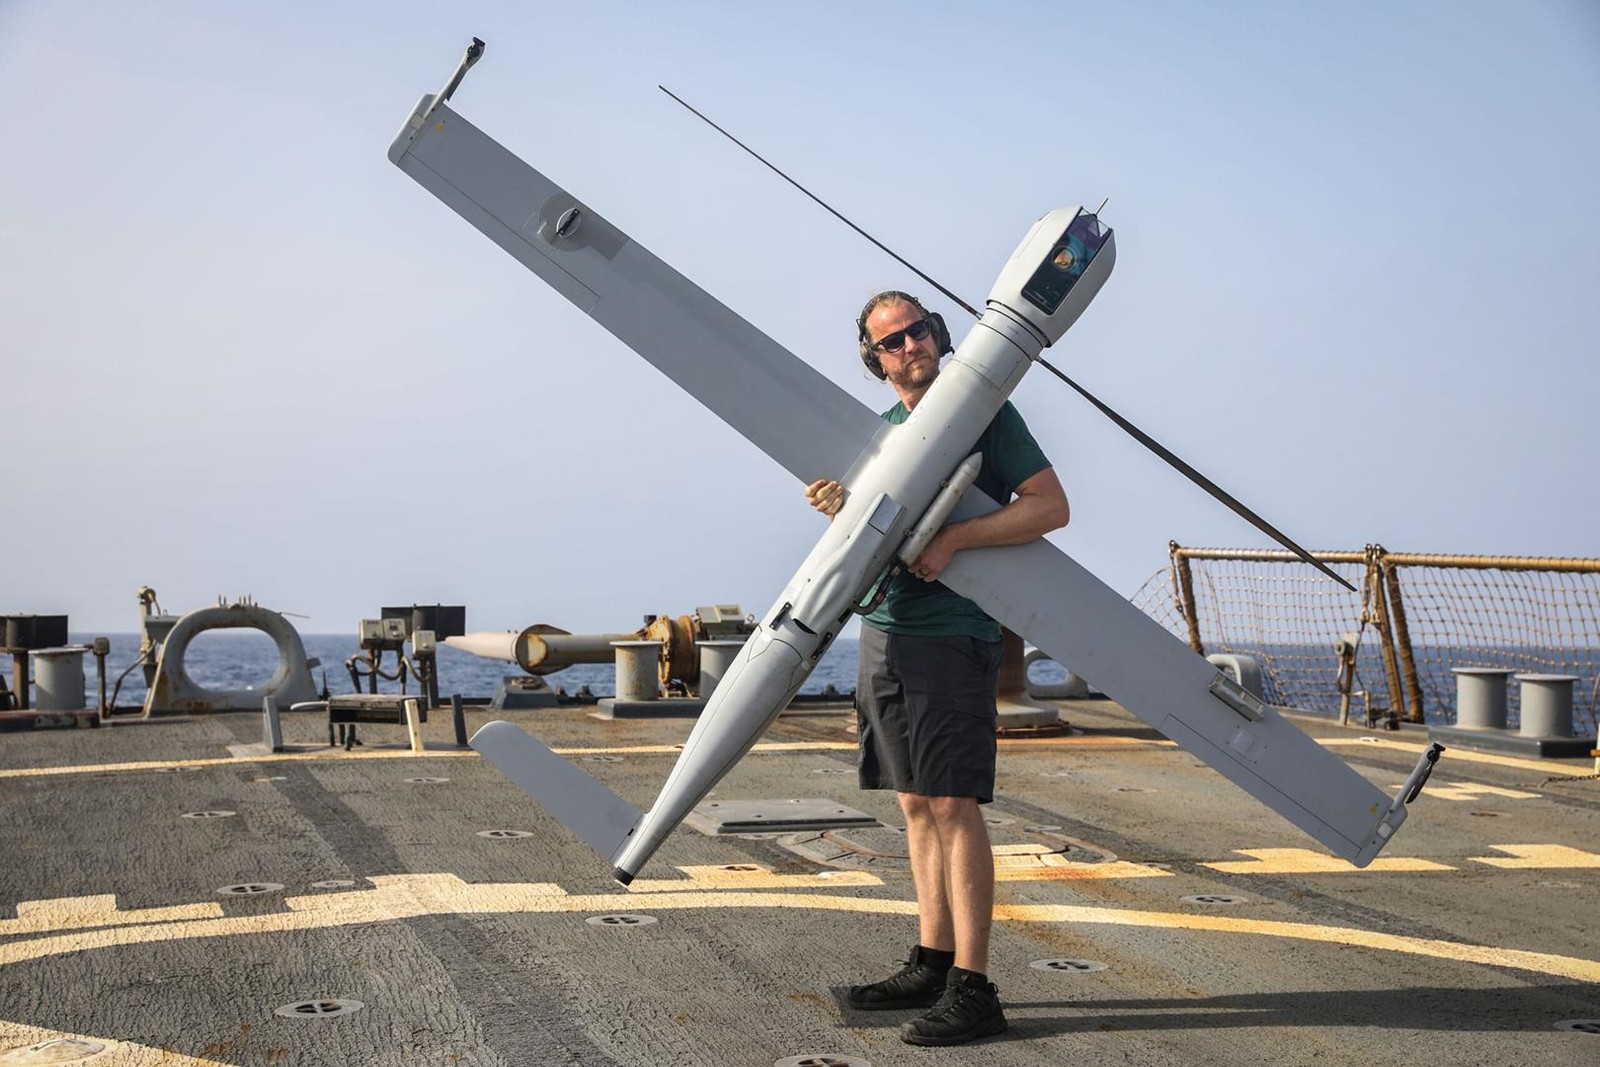 GULF OF OMAN (July 23, 2023) Michael Uridil places a Flexrotor long-range robotic aircraft on the flight deck of the guided missile destroyer USS McFaul (DDG 74) during flight operations, July 23, 2023. McFaul is deployed to the U.S. 5th Fleet area of operations to help ensure maritime security and stability in the Middle East region. (U.S. Photo by Mass Communication Specialist 2nd Class Juel Foster)
